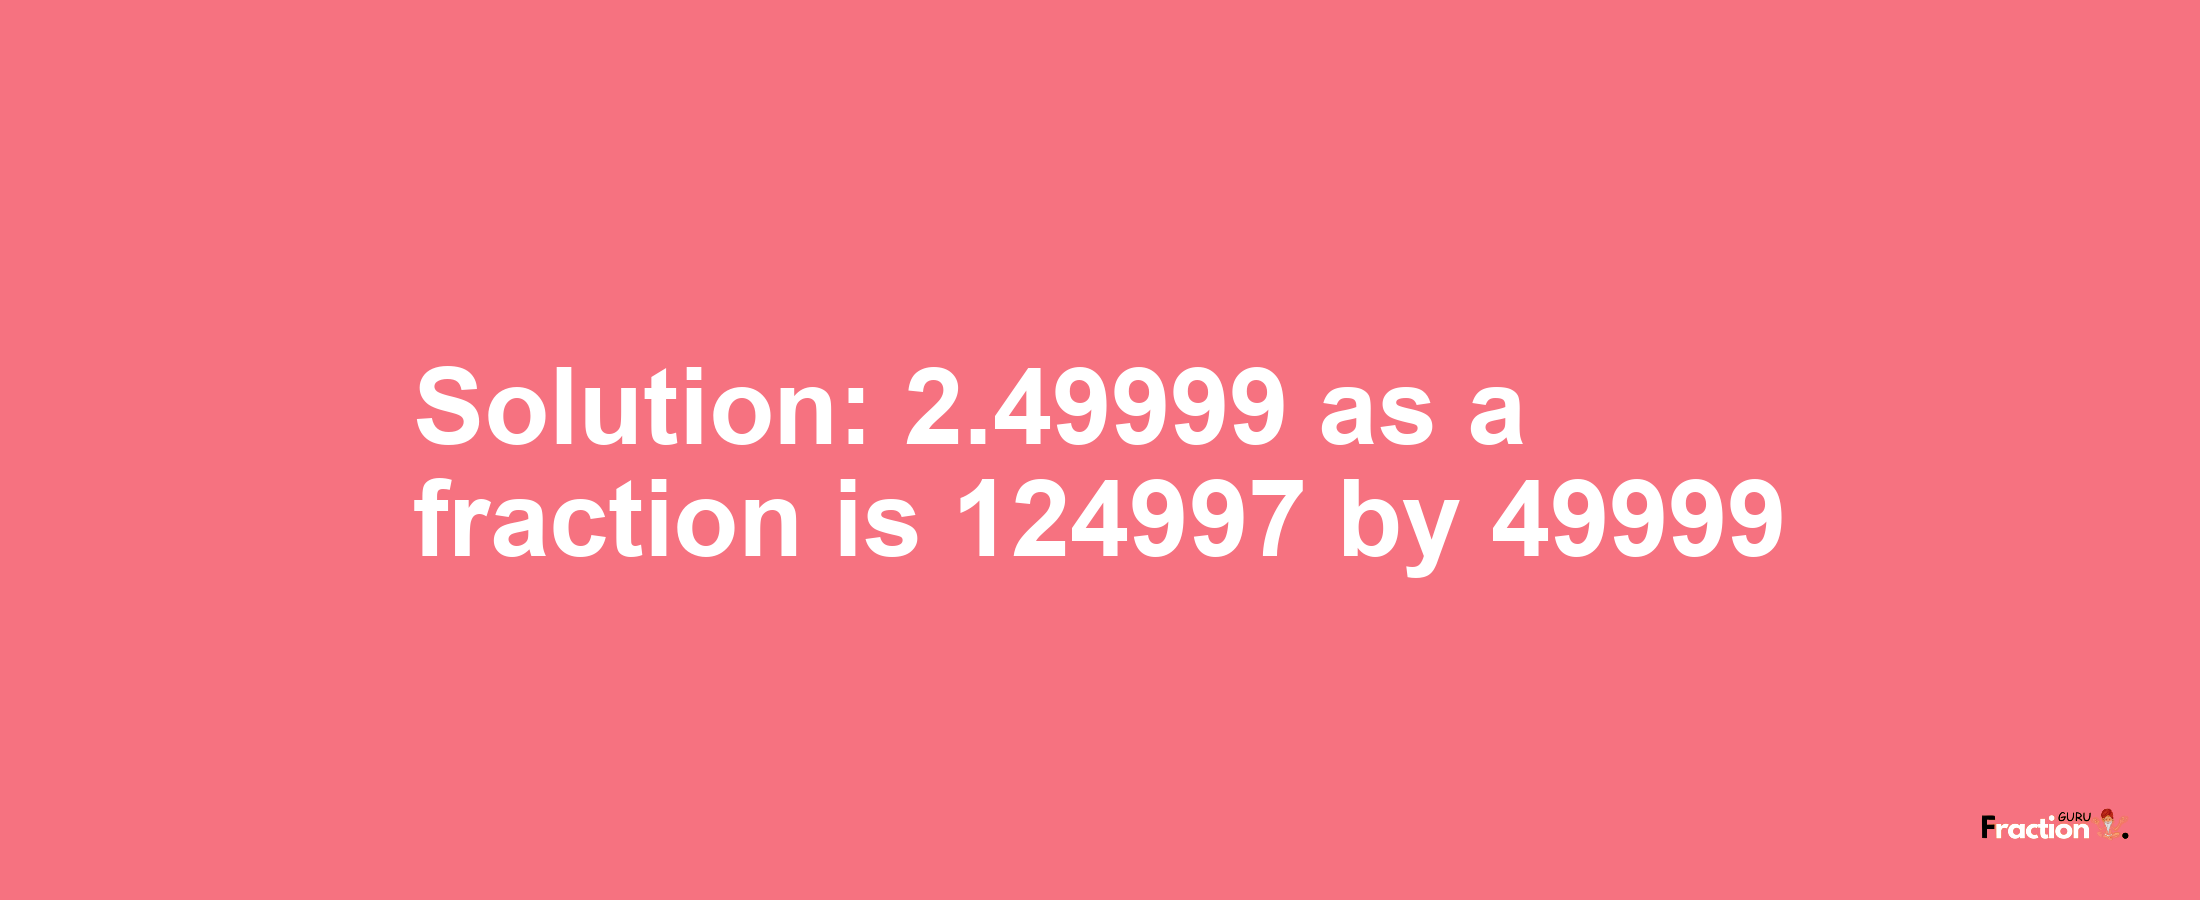 Solution:2.49999 as a fraction is 124997/49999